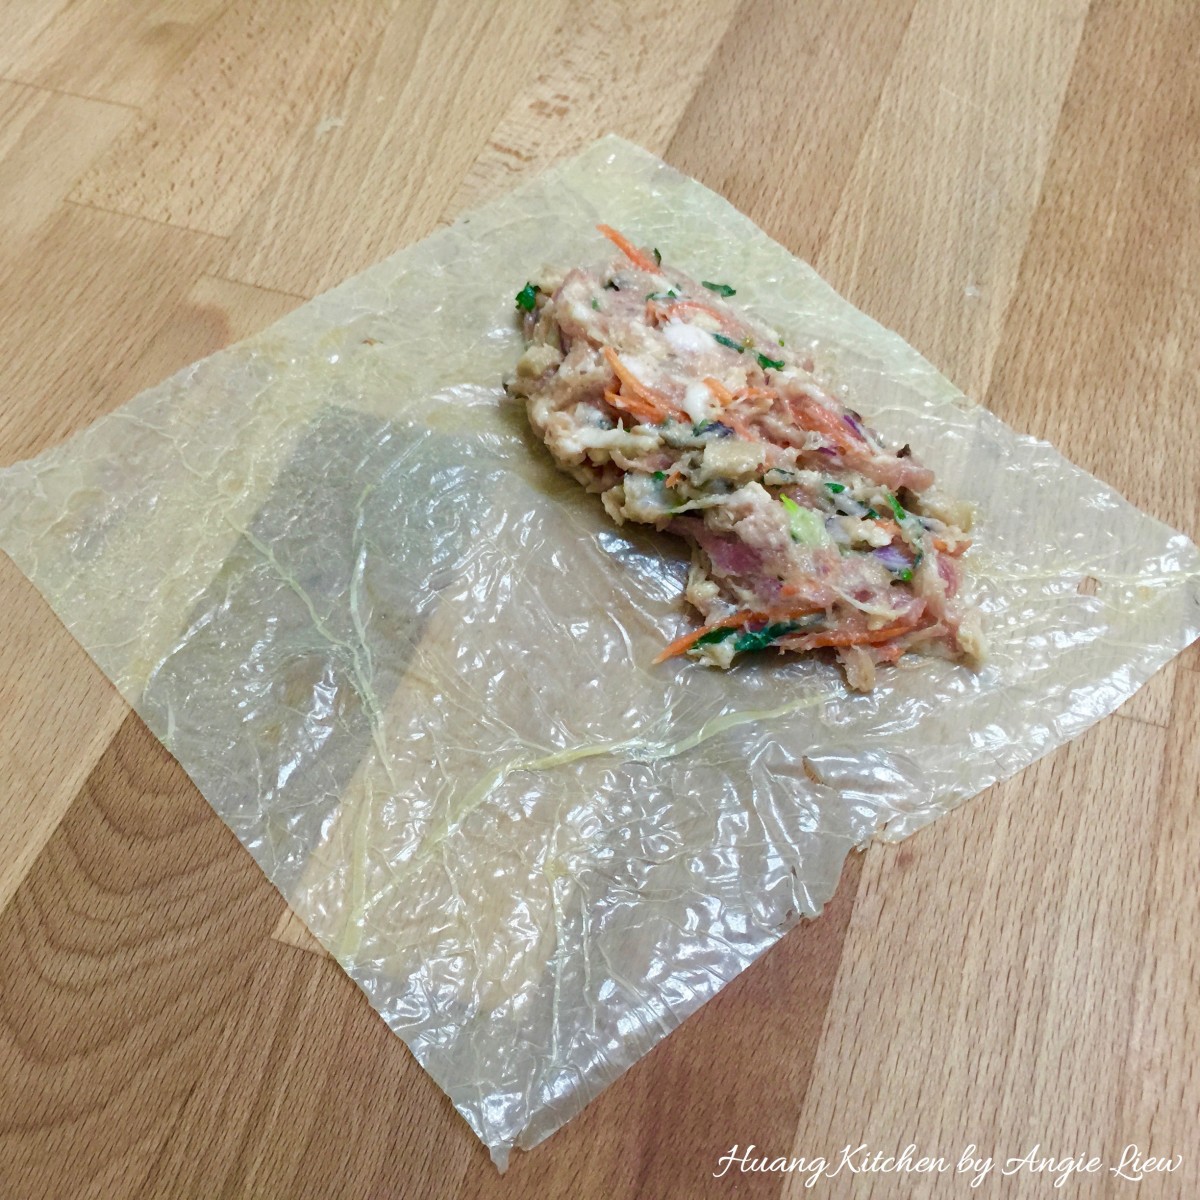 Chinese Meat Rolls Recipe (Loh Bak/Ngo Hiang) - wrapping meat roll